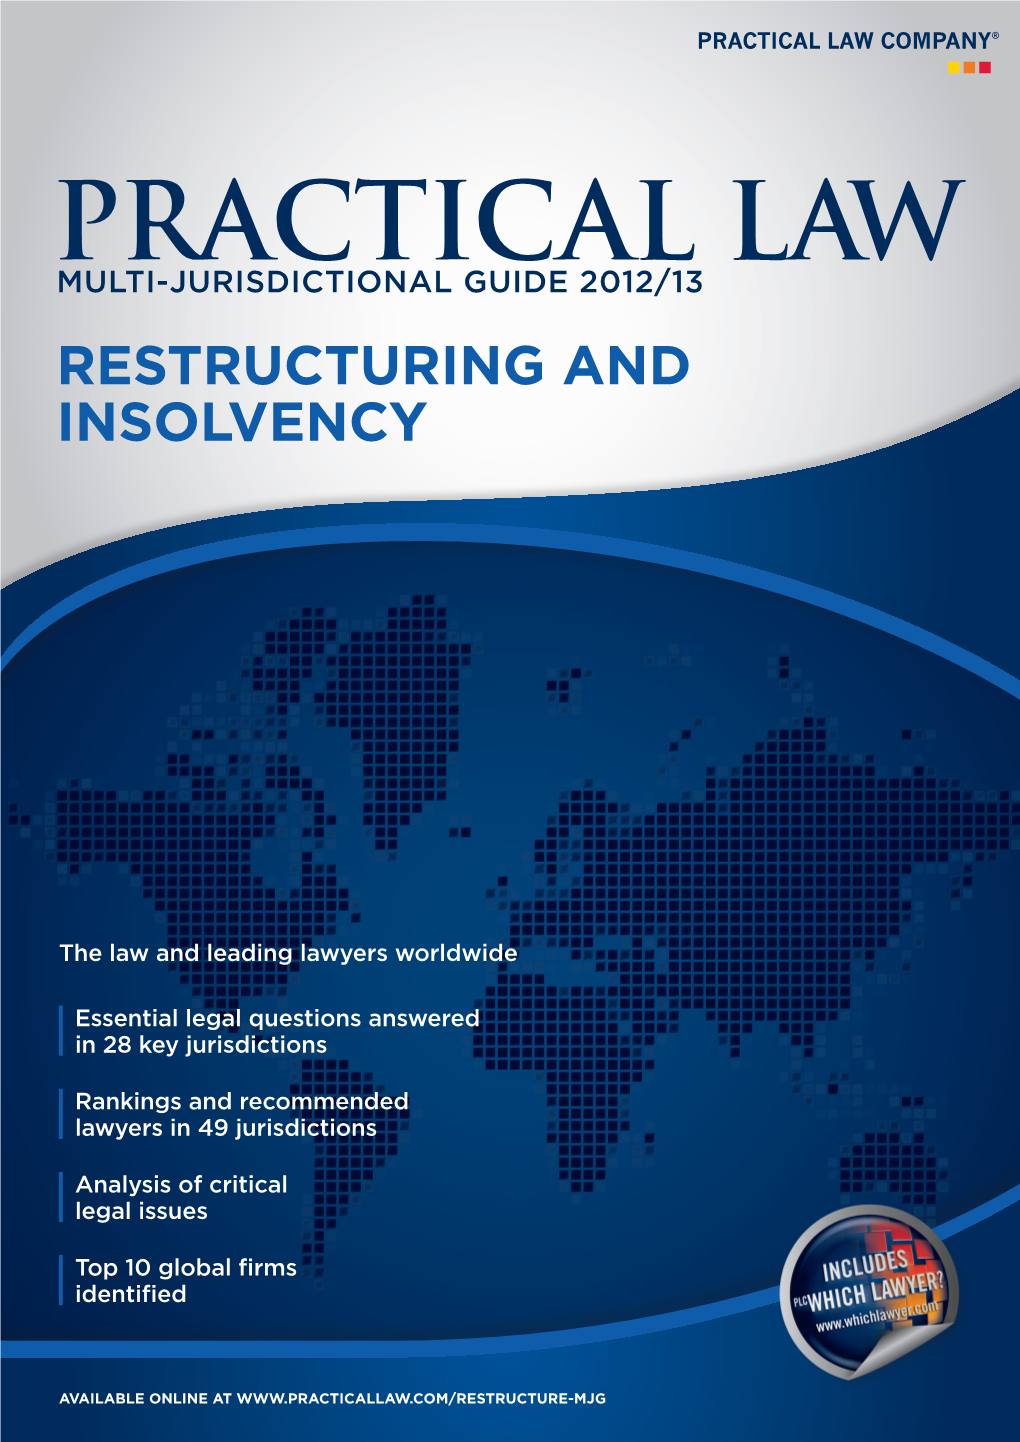 Practical Law Multi-Jurisdictional Guide 2012/13 Restructuring and Insolvency